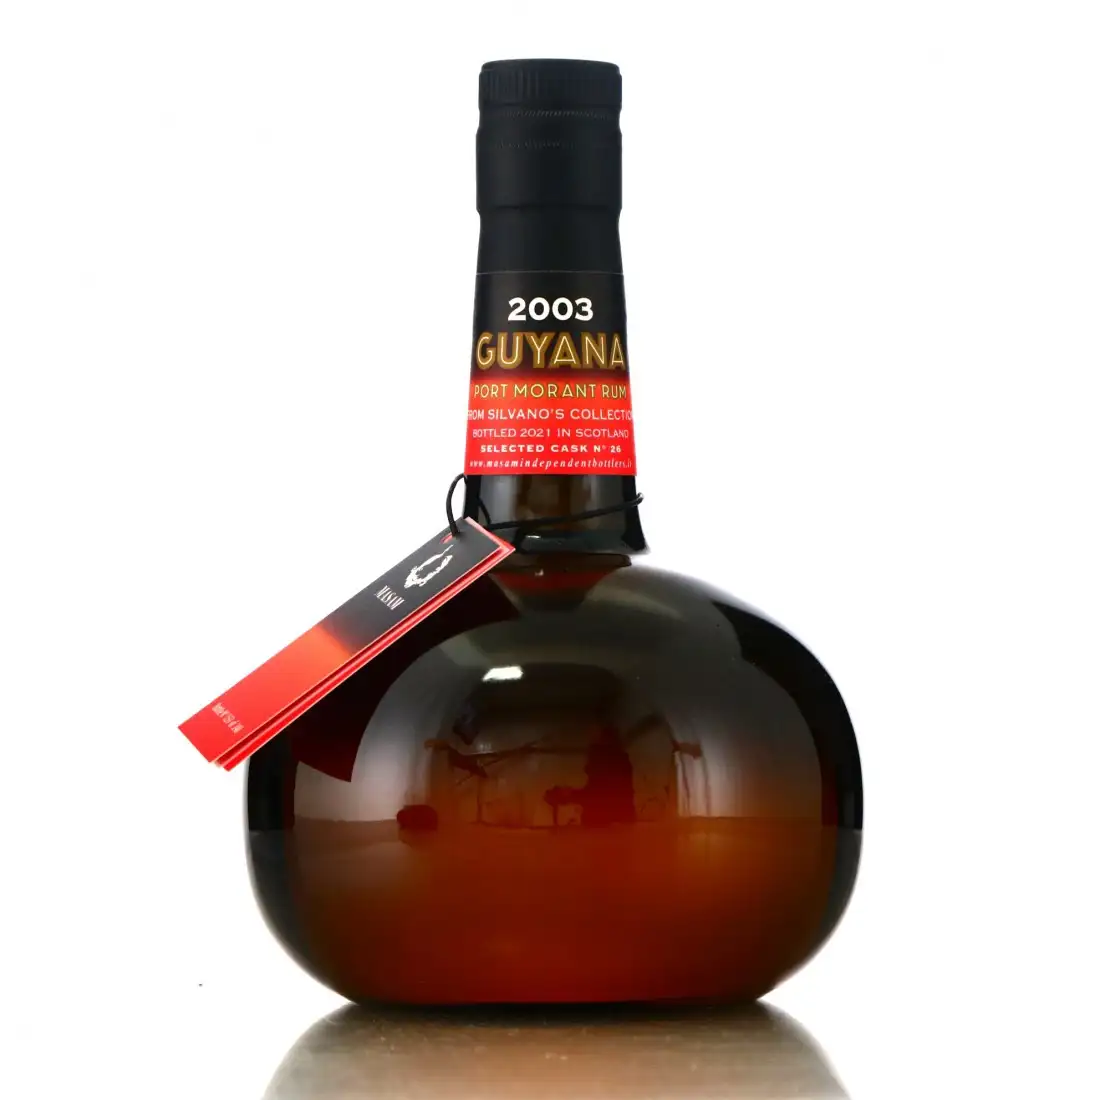 Image of the front of the bottle of the rum Silvano‘s Collection